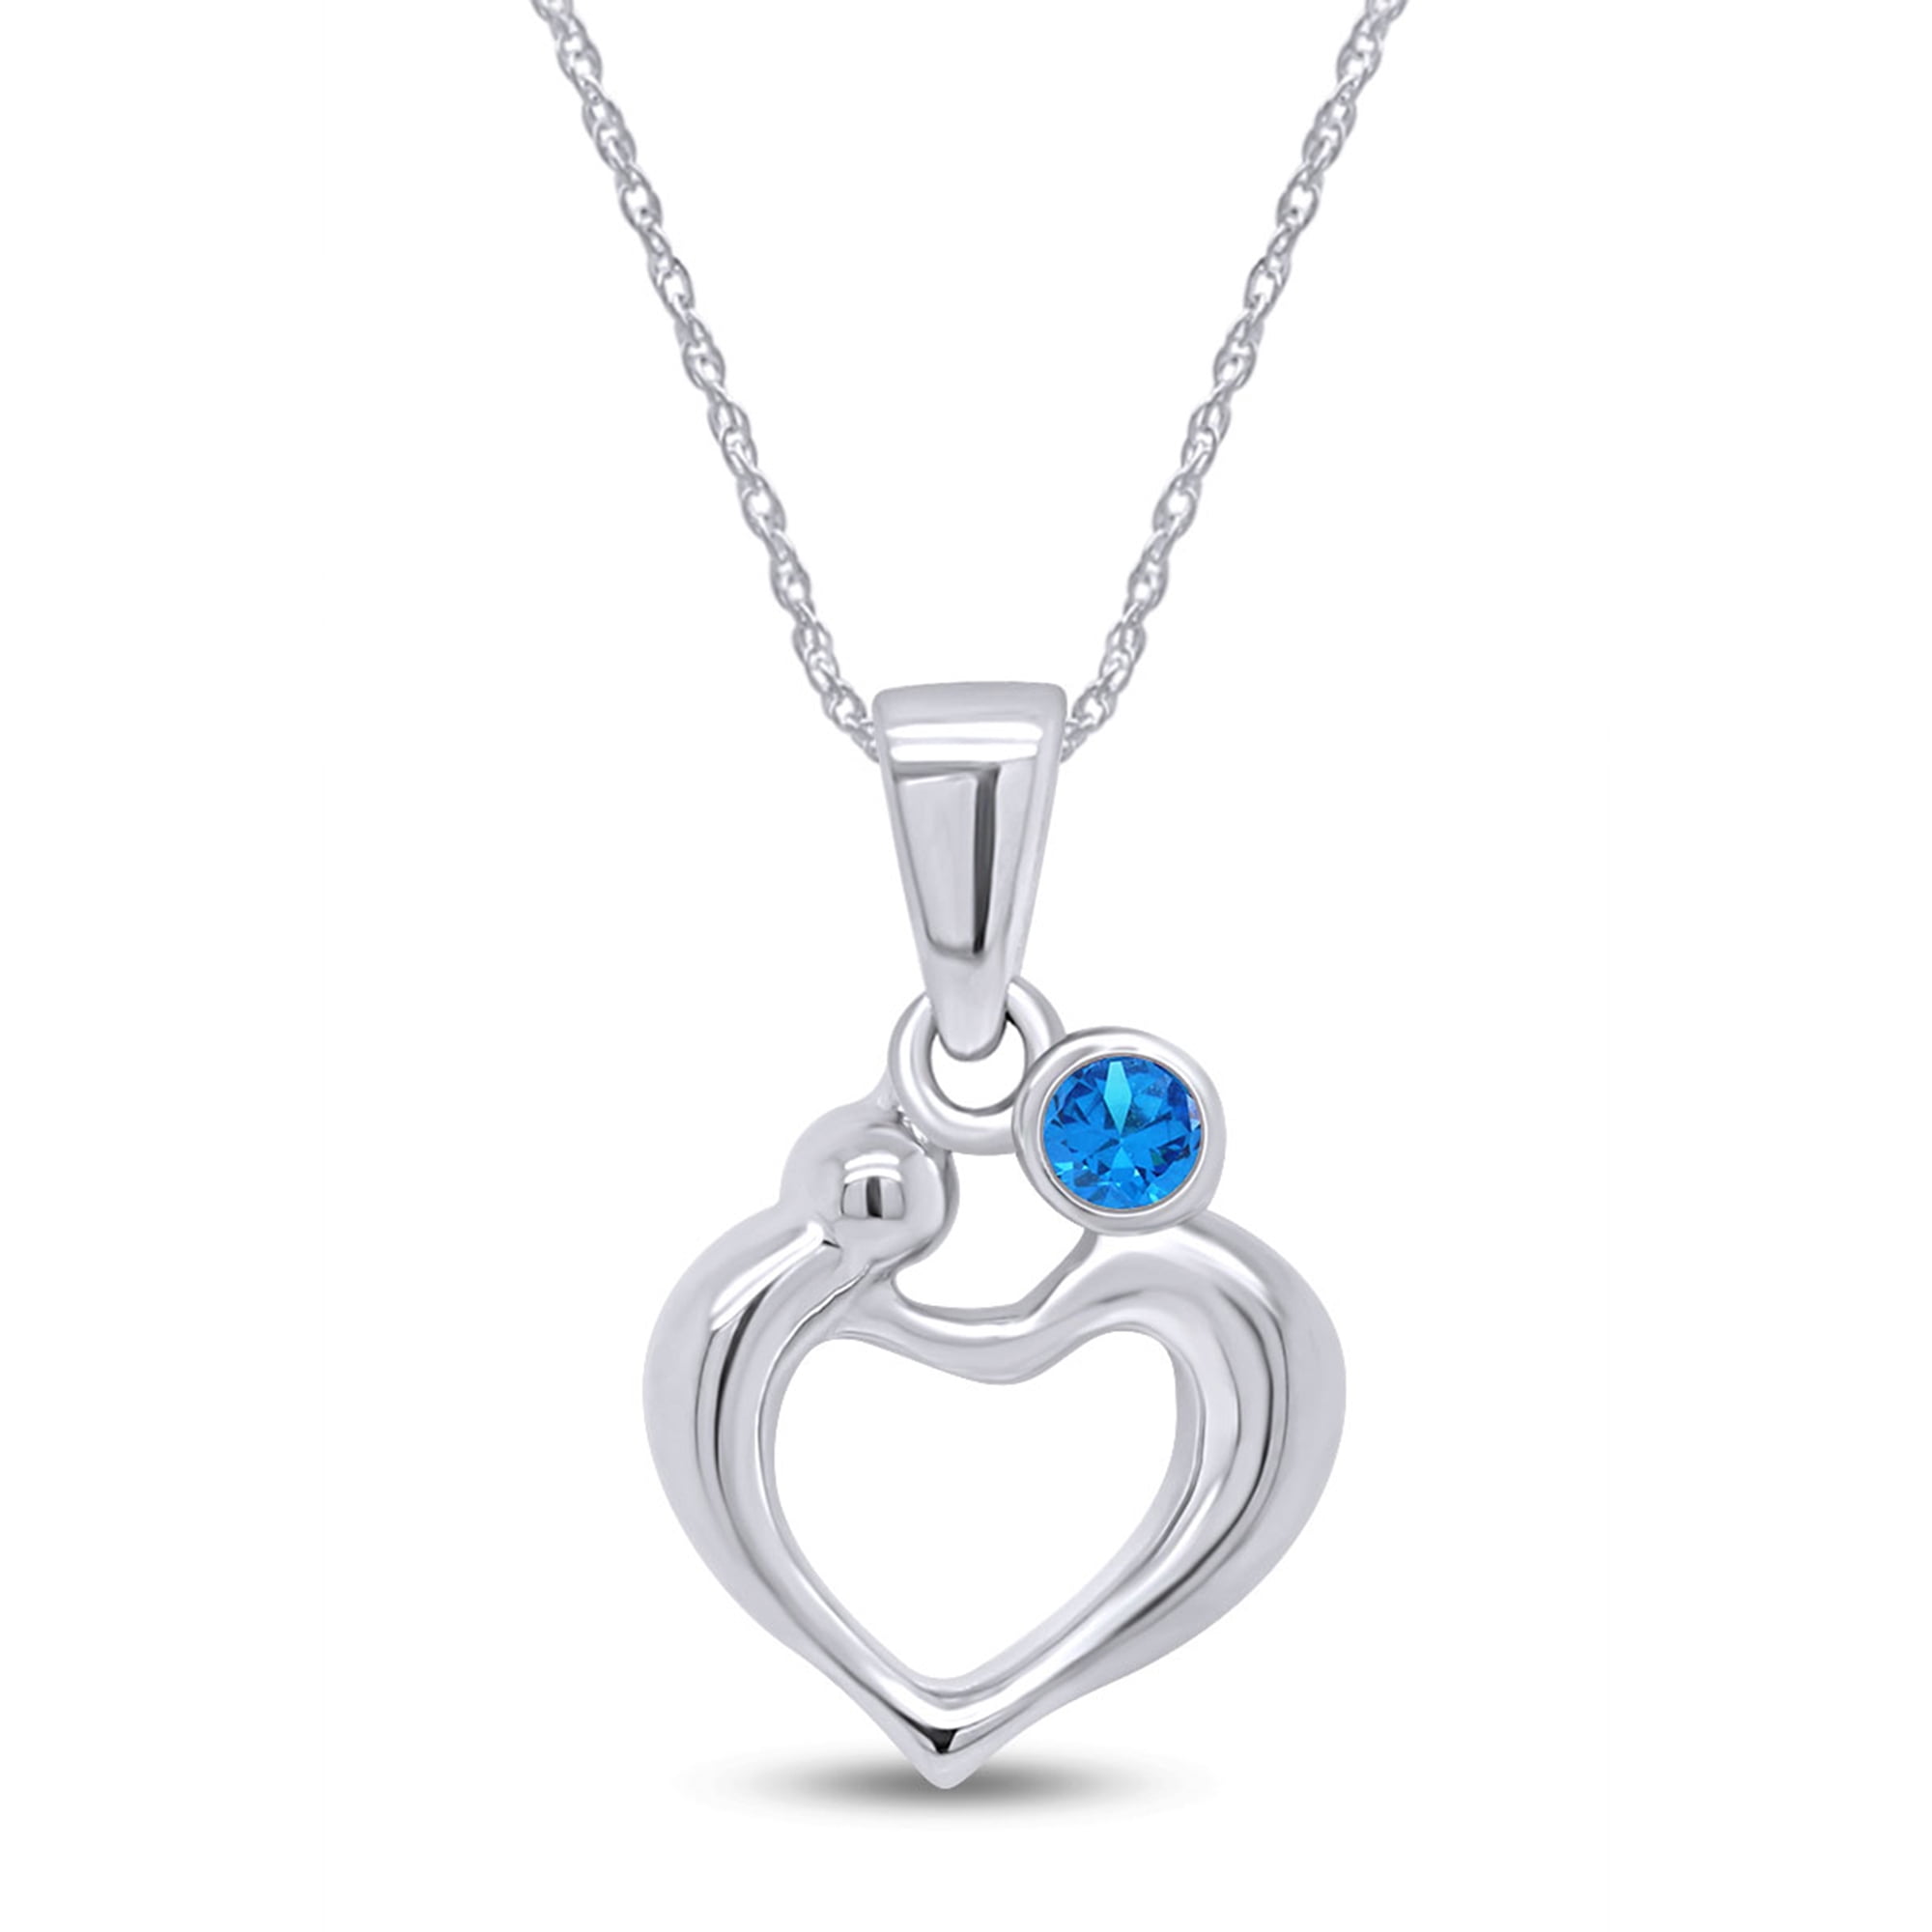 Round Silver Mothers Day Heart Pendant